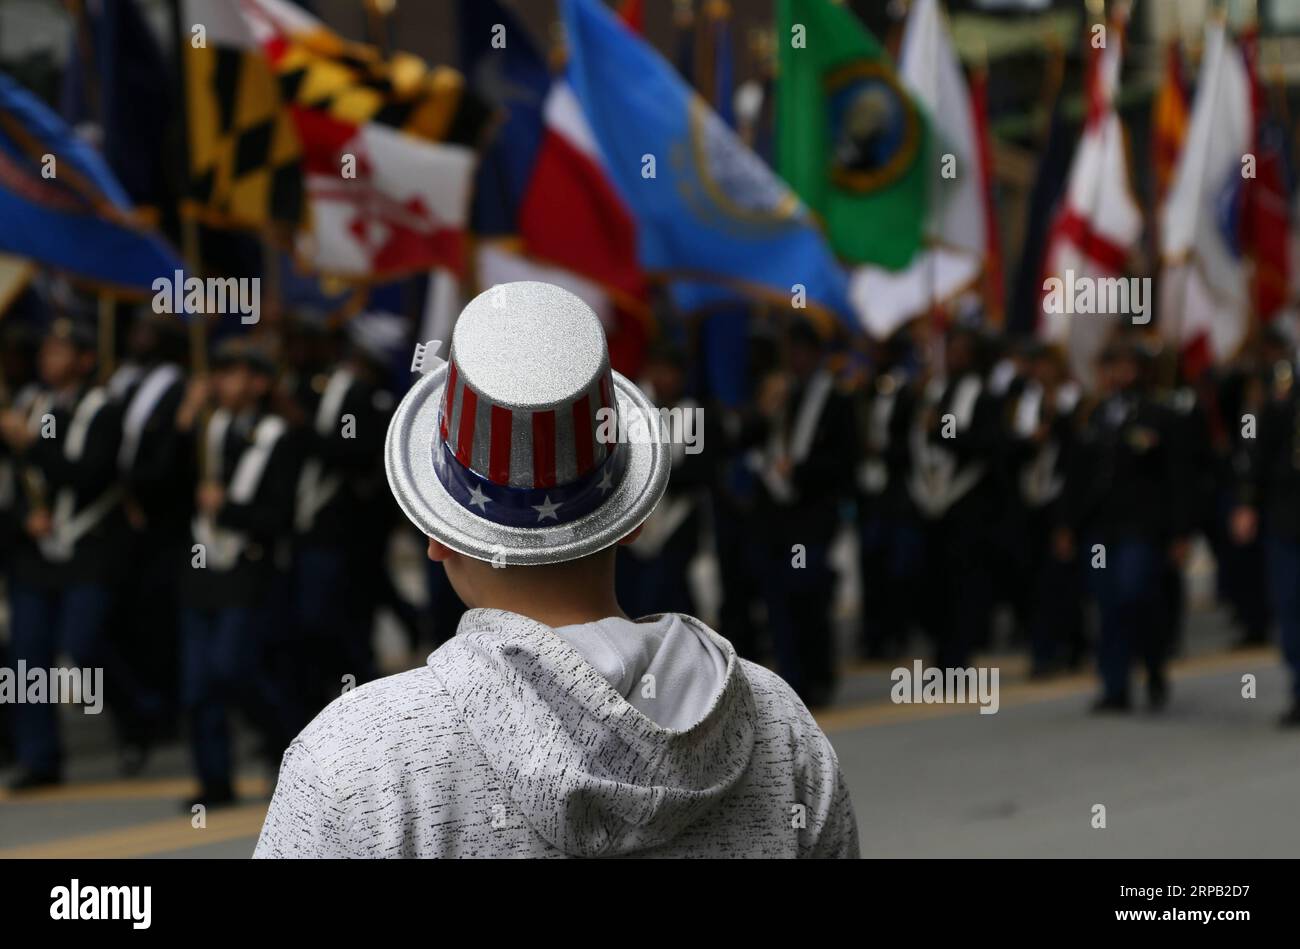 (190525) -- CHICAGO, May 25, 2019 (Xinhua) -- A man views the Memorial Day Parade in Chicago, the United States, on May 25, 2019. The Memorial Day is a federal holiday in the United States for remembering people who have died while serving in the country s armed forces. (Xinhua/Wang Qiang) U.S.-CHICAGO-MEMORIAL DAY-PARADE PUBLICATIONxNOTxINxCHN Stock Photo